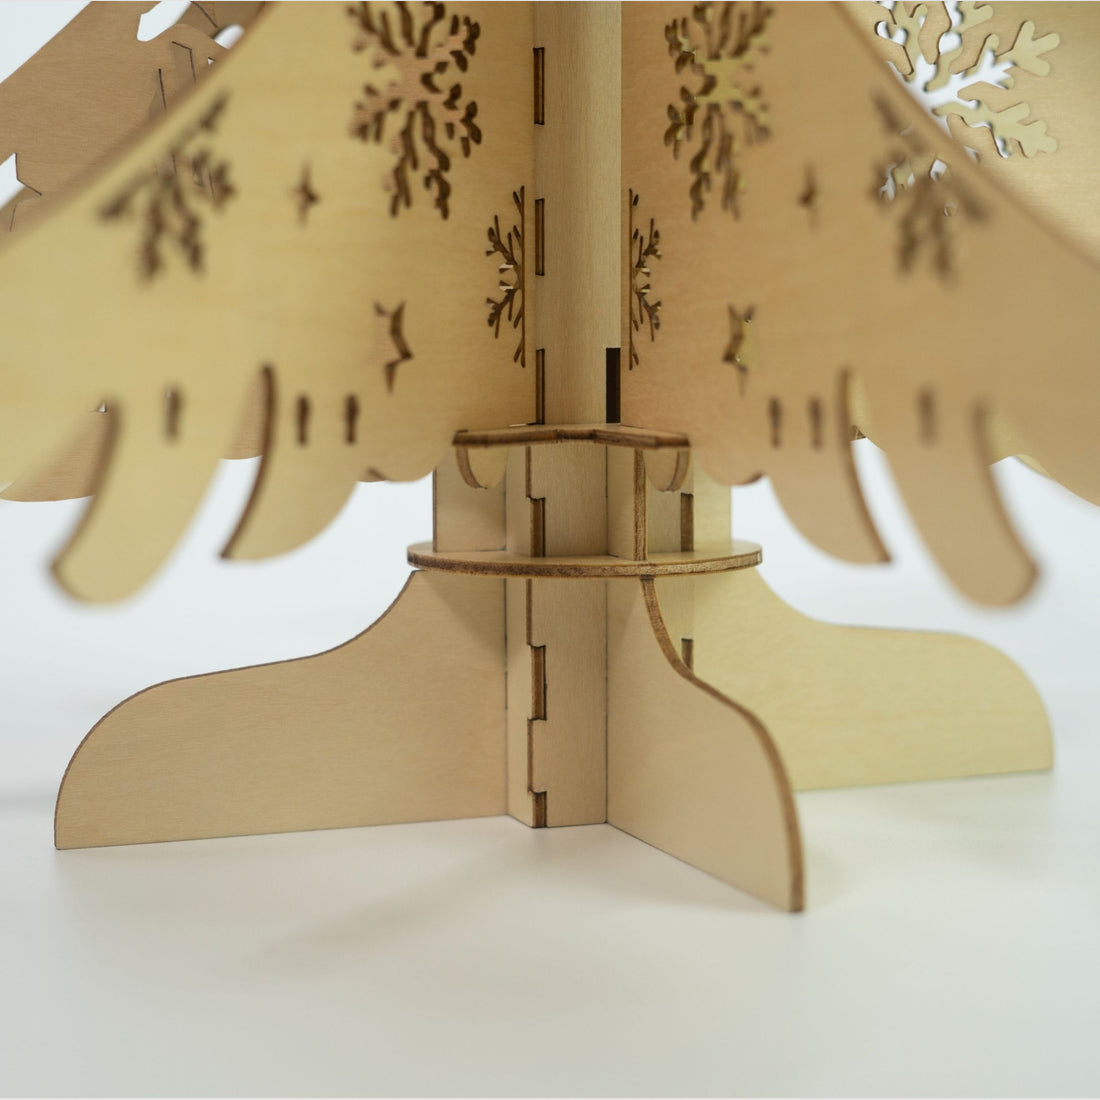 3D Wooden Puzzles Christmas Tree